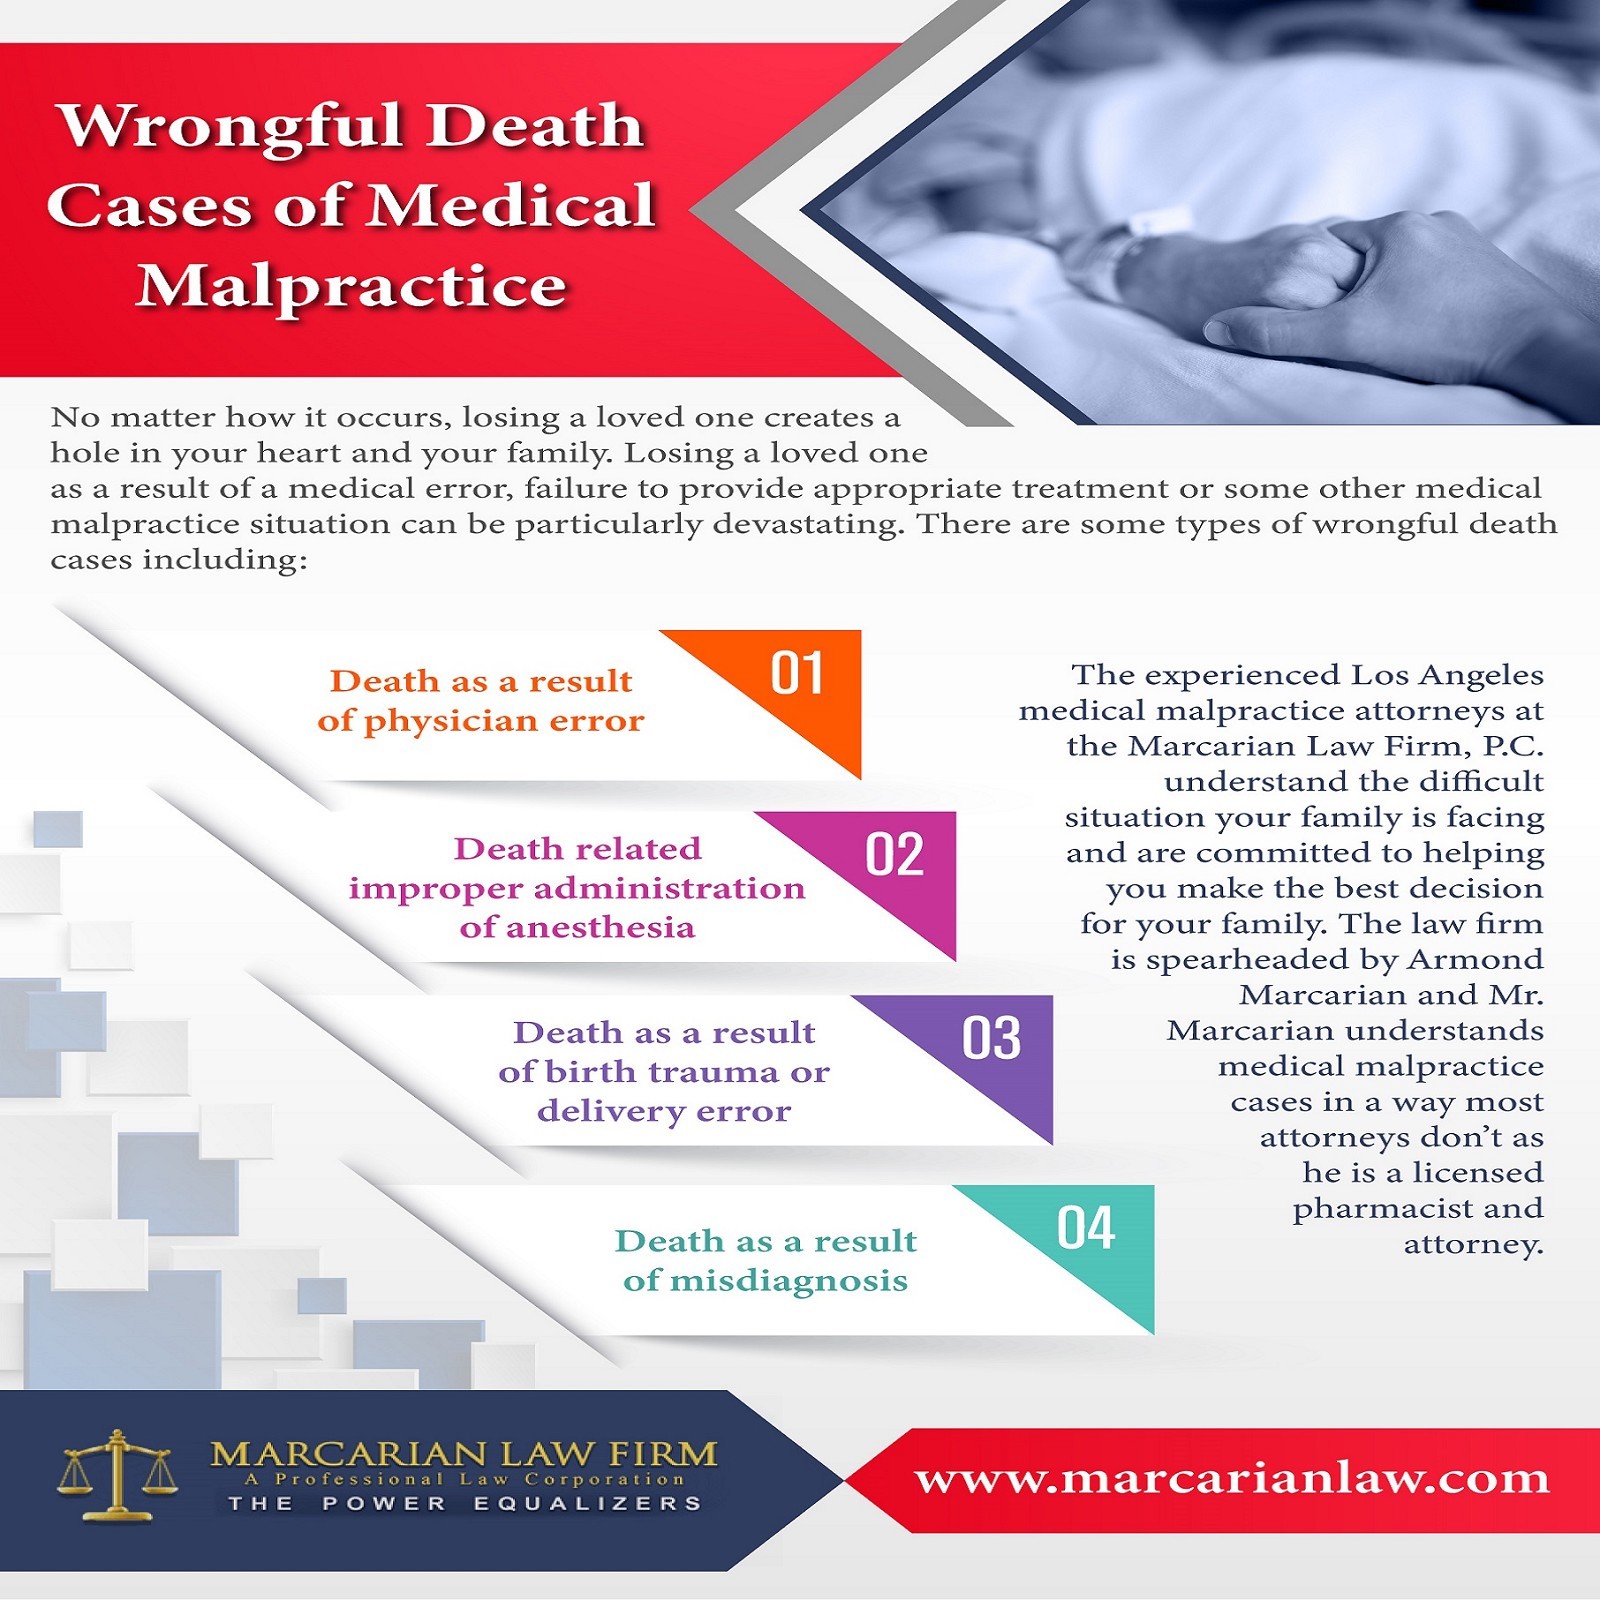 Wrongful Death Cases of Medical Malpractice